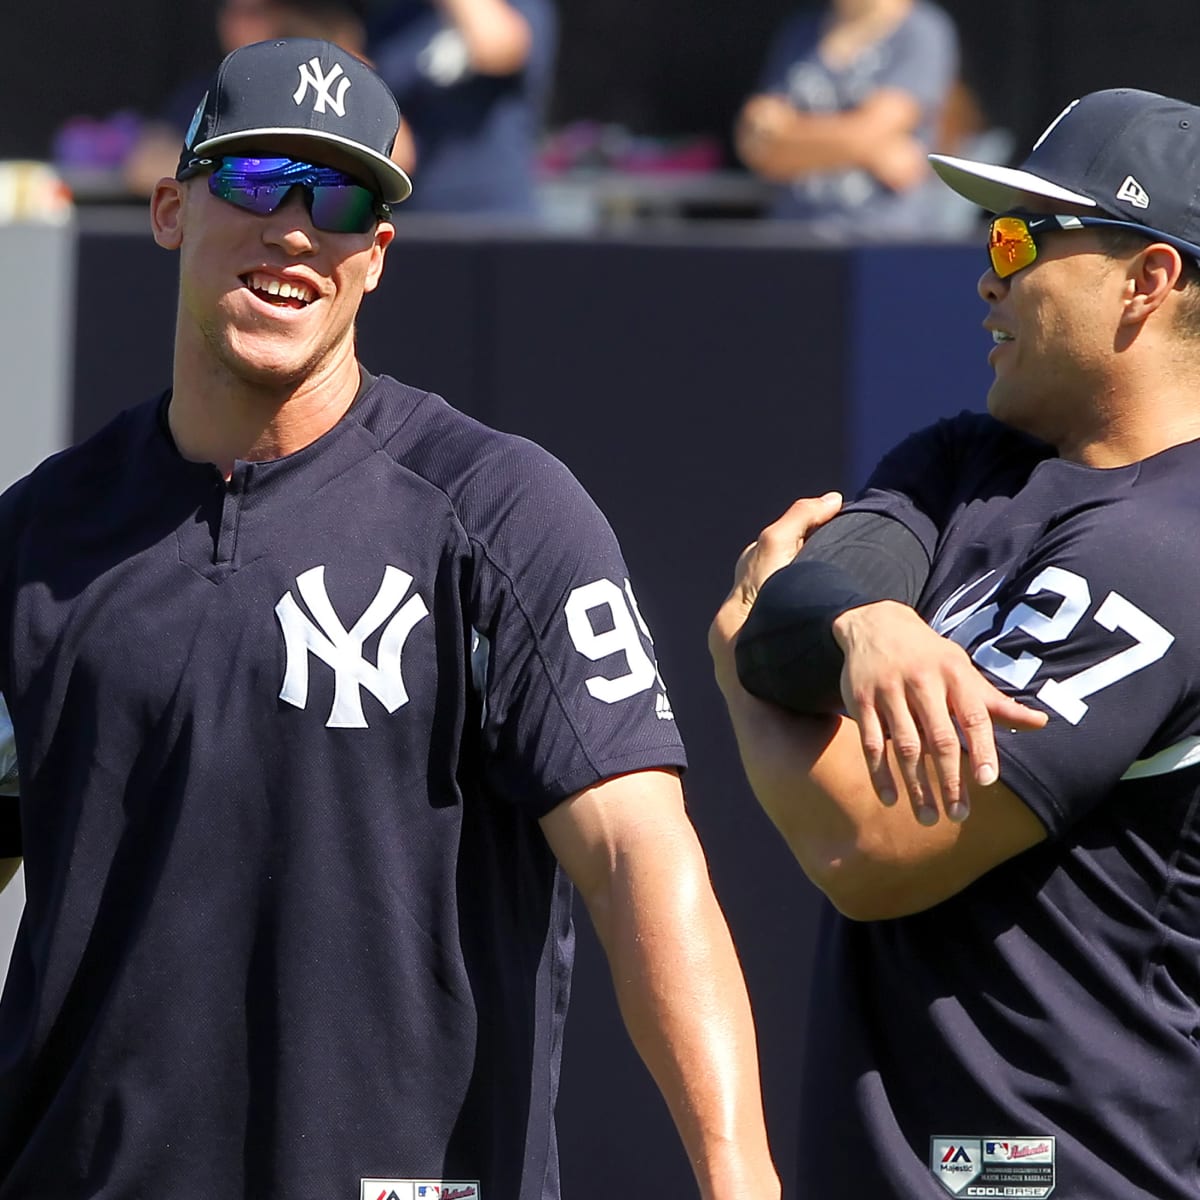 Yankees' batting practice open to fans, gates open early - Sports